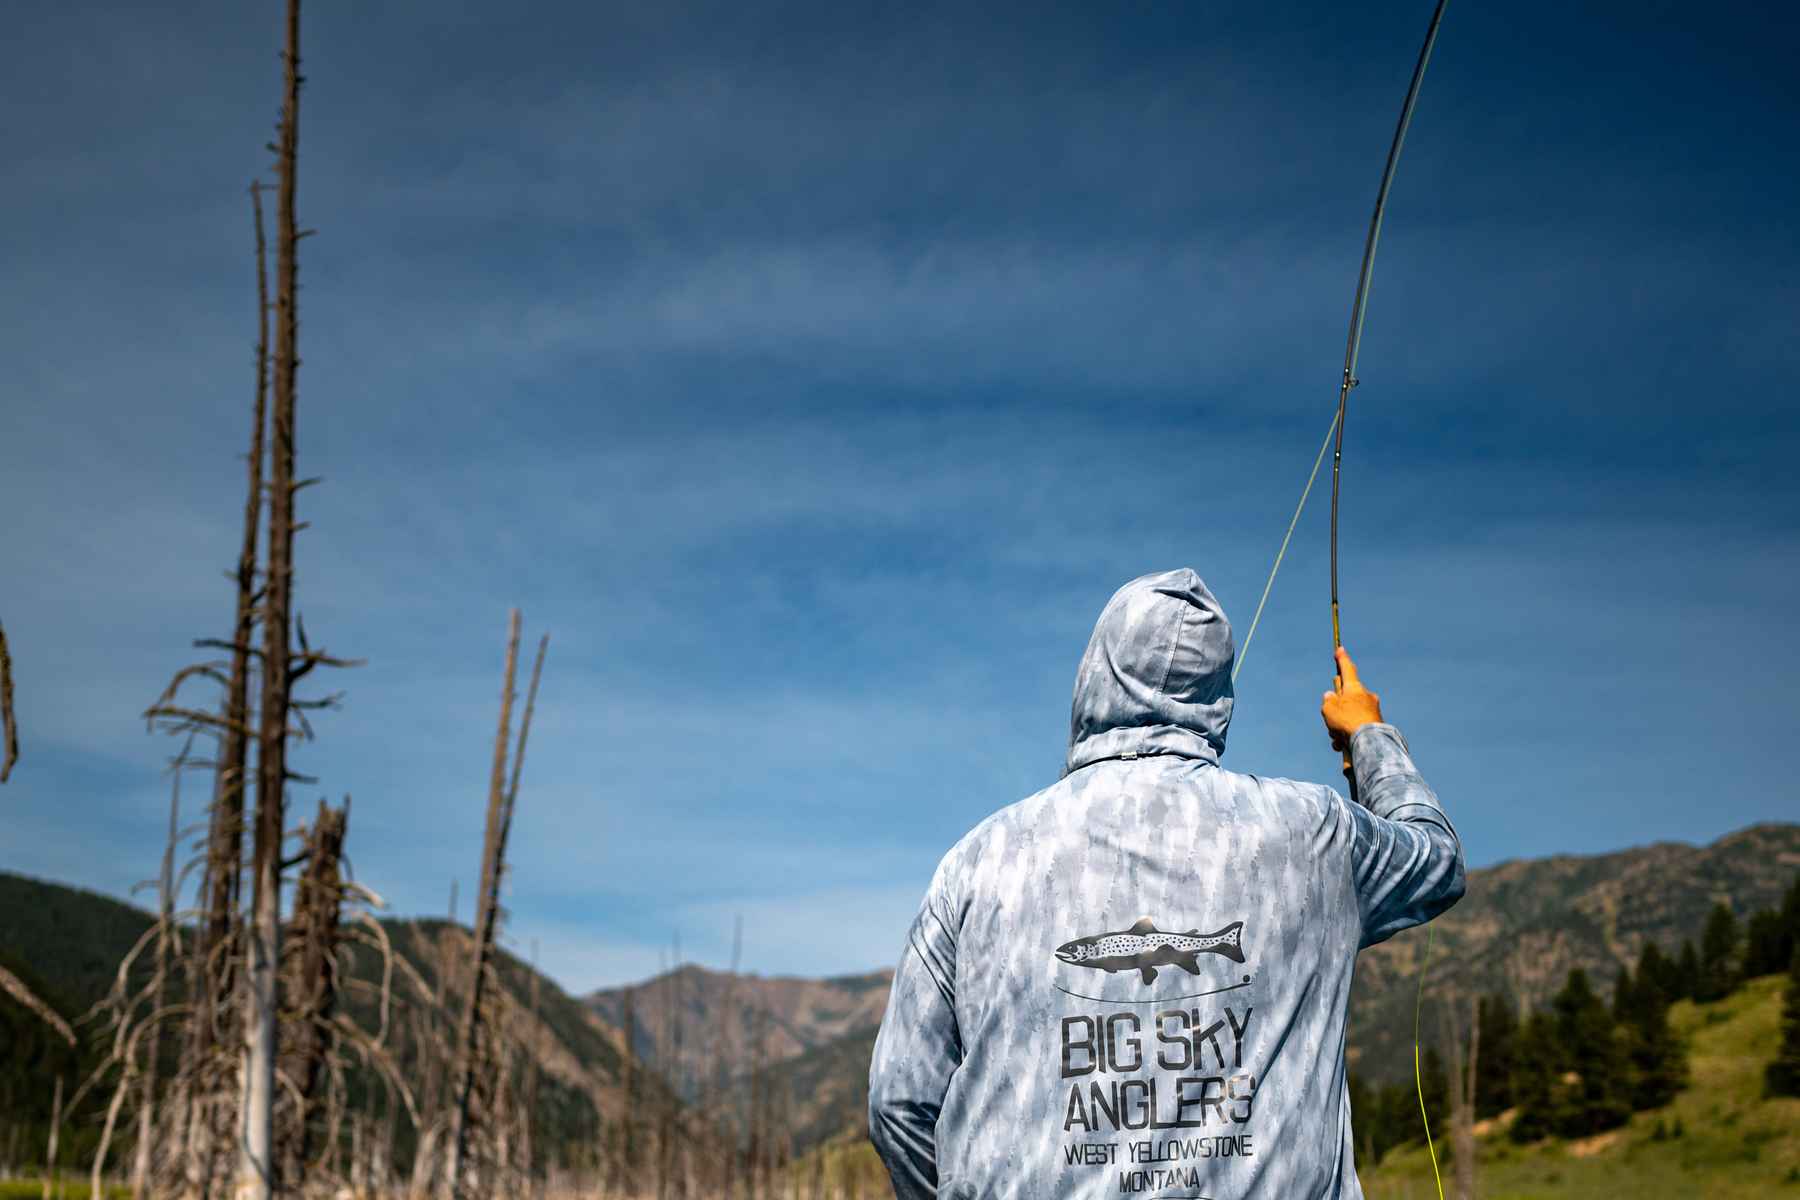 http://www.hatchmag.com/sites/default/files/styles/extra-large/public/field/image/1finger.jpg